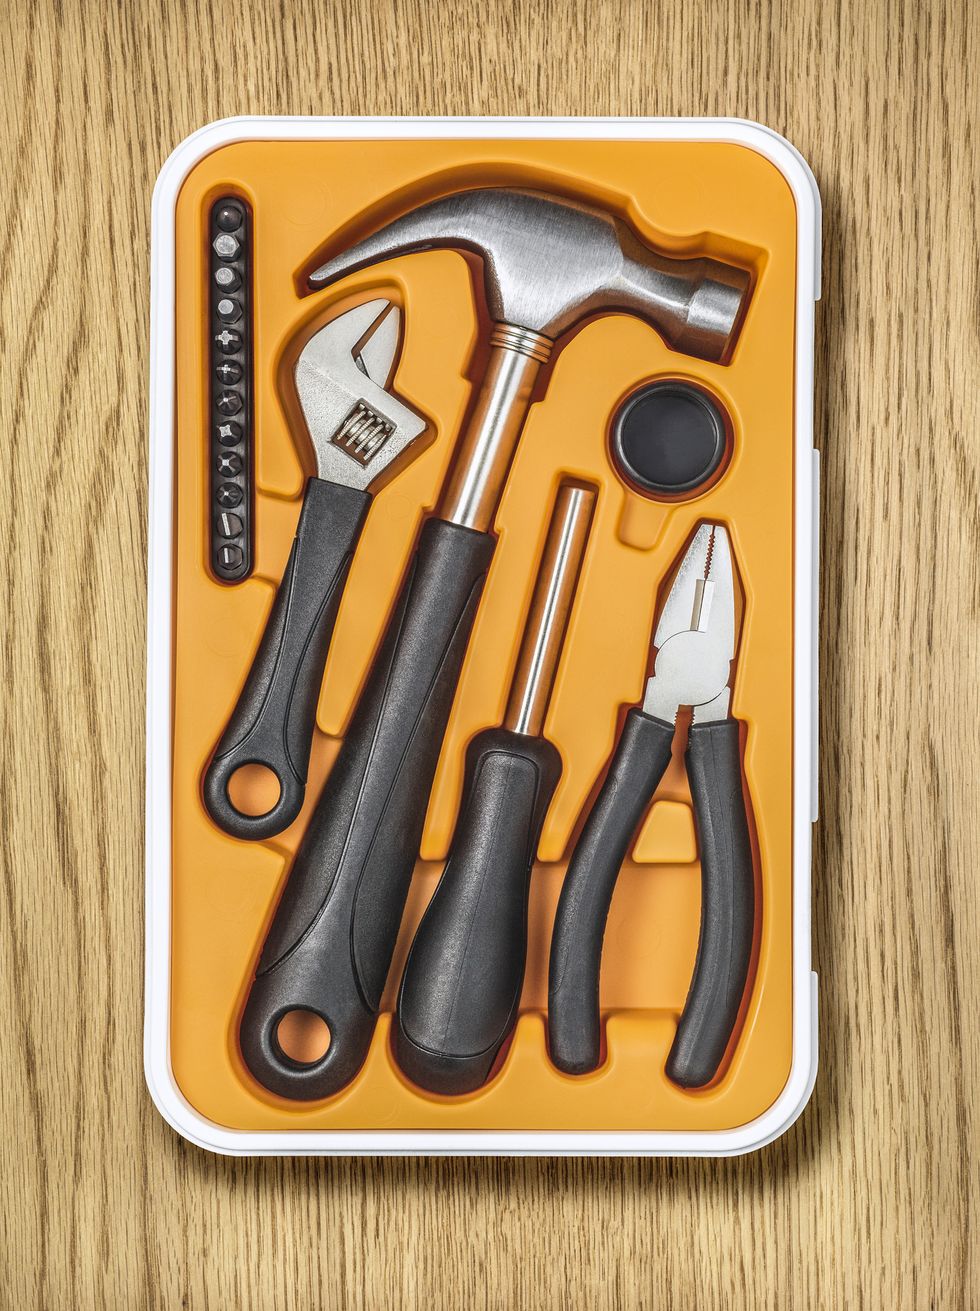 a tool box that contains a hammer, screwdriver, pliers, wrench all contained in a modern plastic container